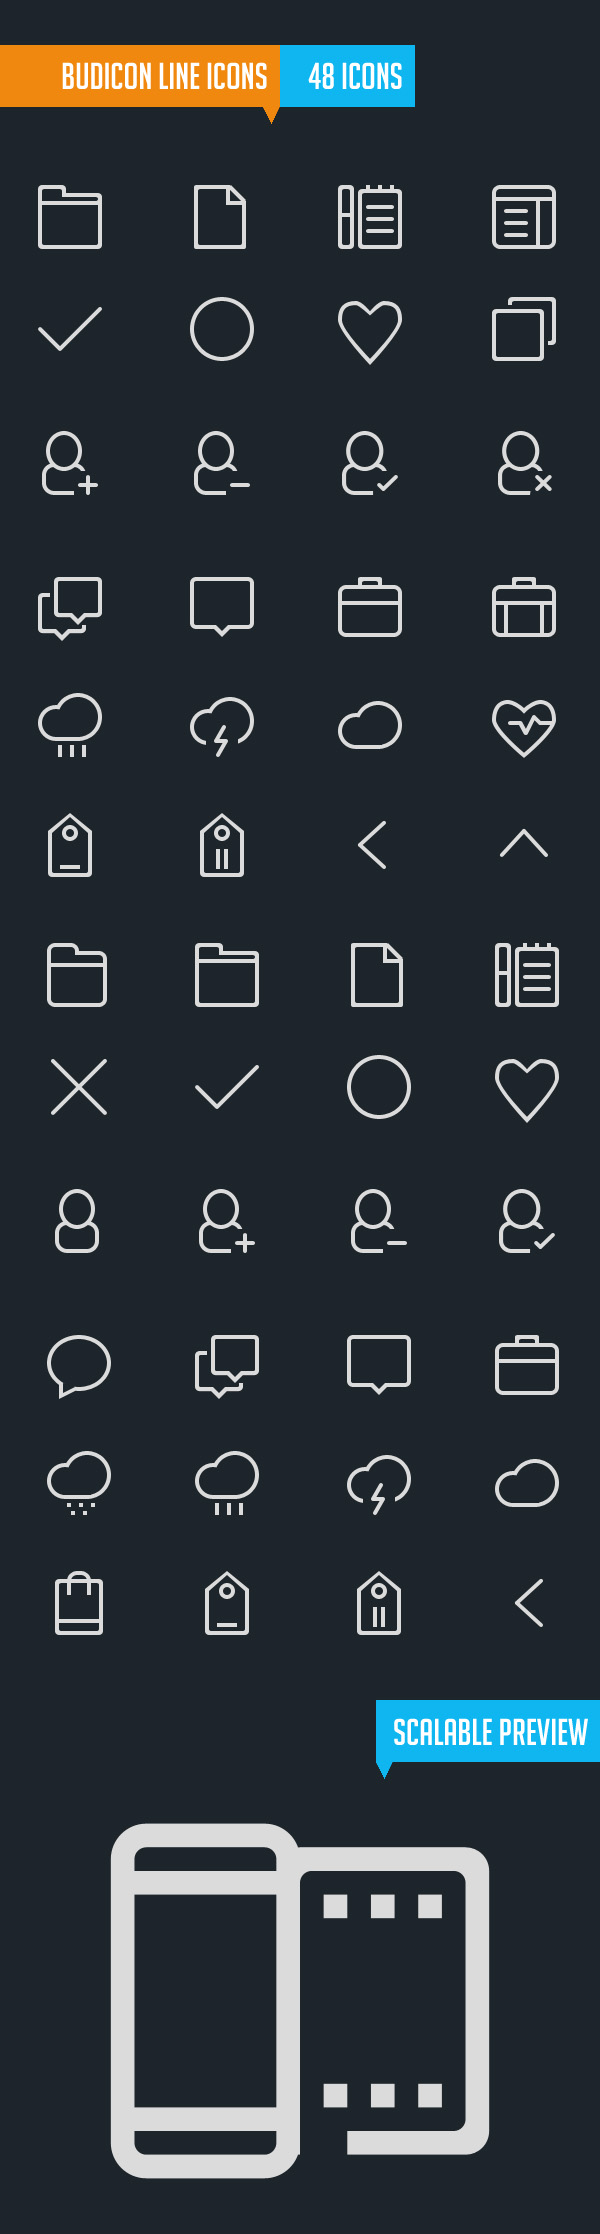 BudIcon Scalable Vector Line Icons (48 Icons)